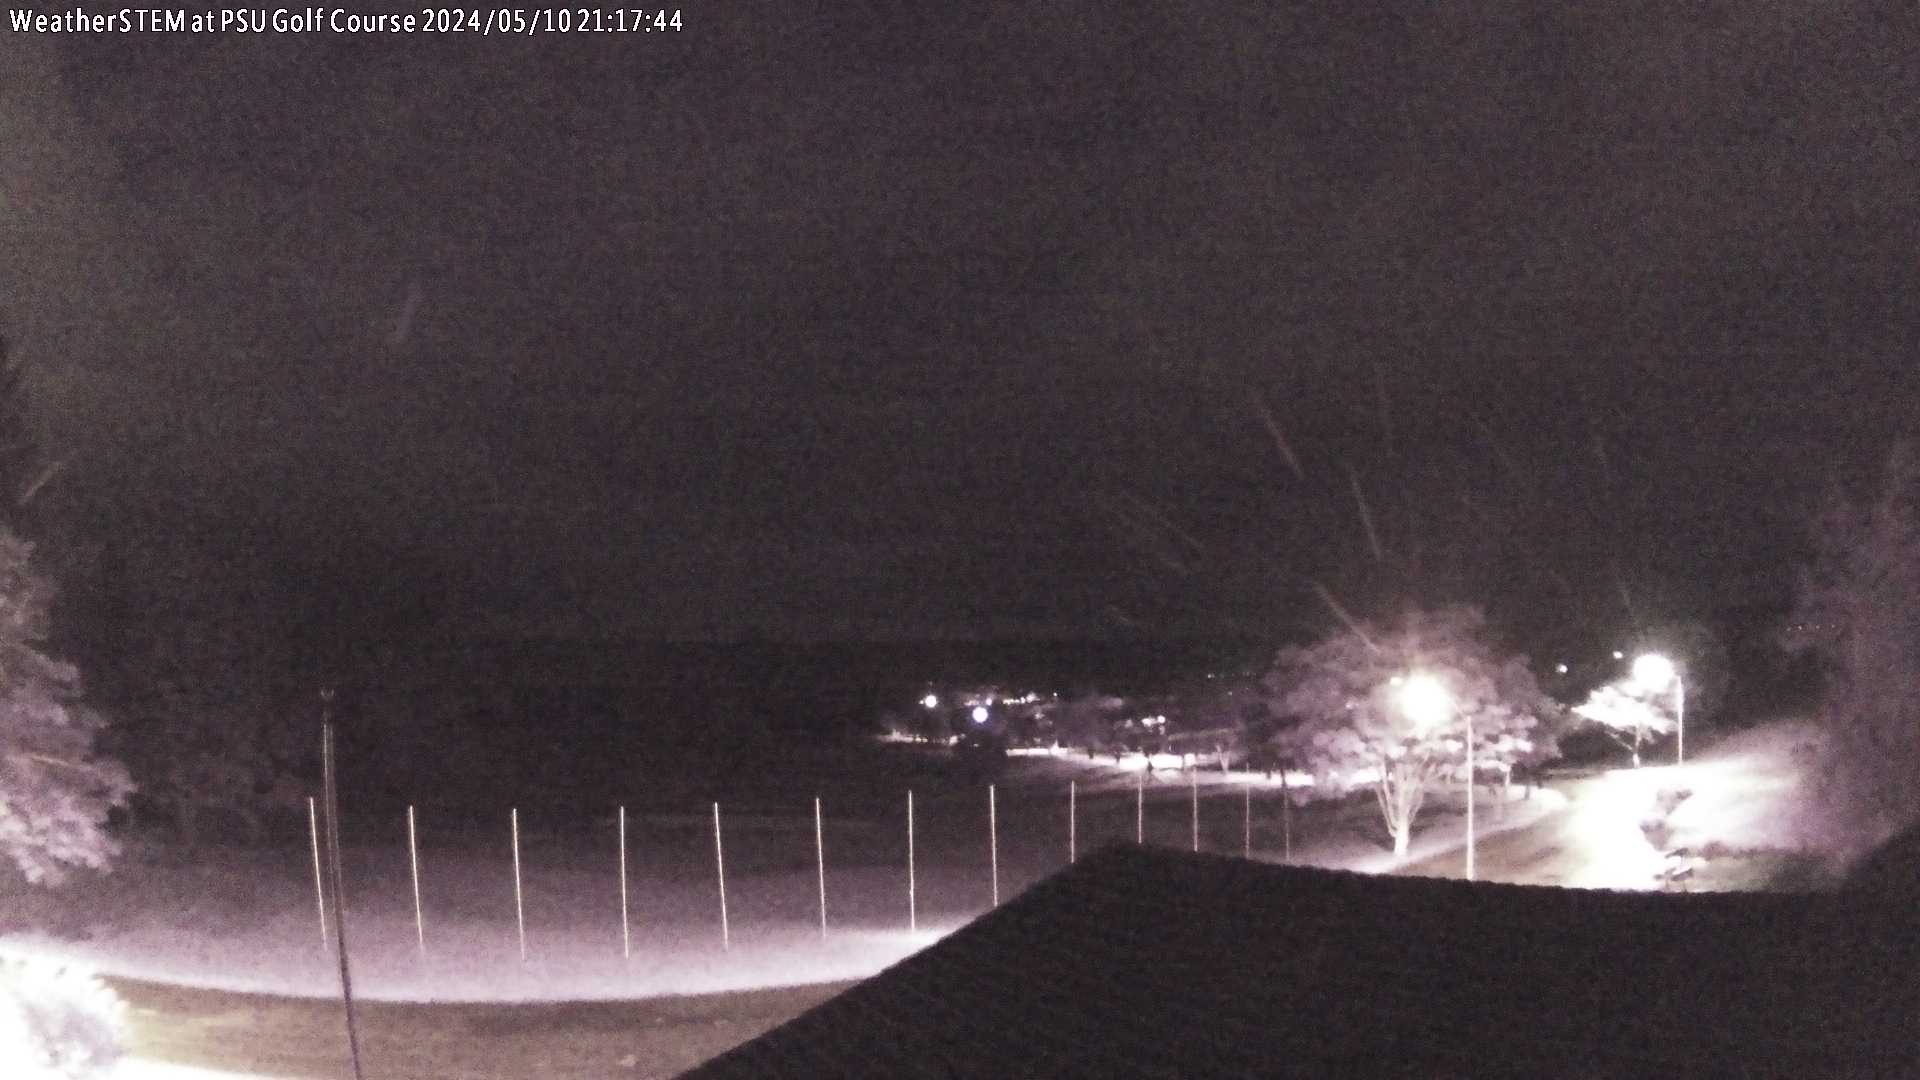 LIVE: WeatherSTEM Cloud Camera PSUGolfWxSTEM in Centre County, Pennsylvania PA at Penn State Golf Courses